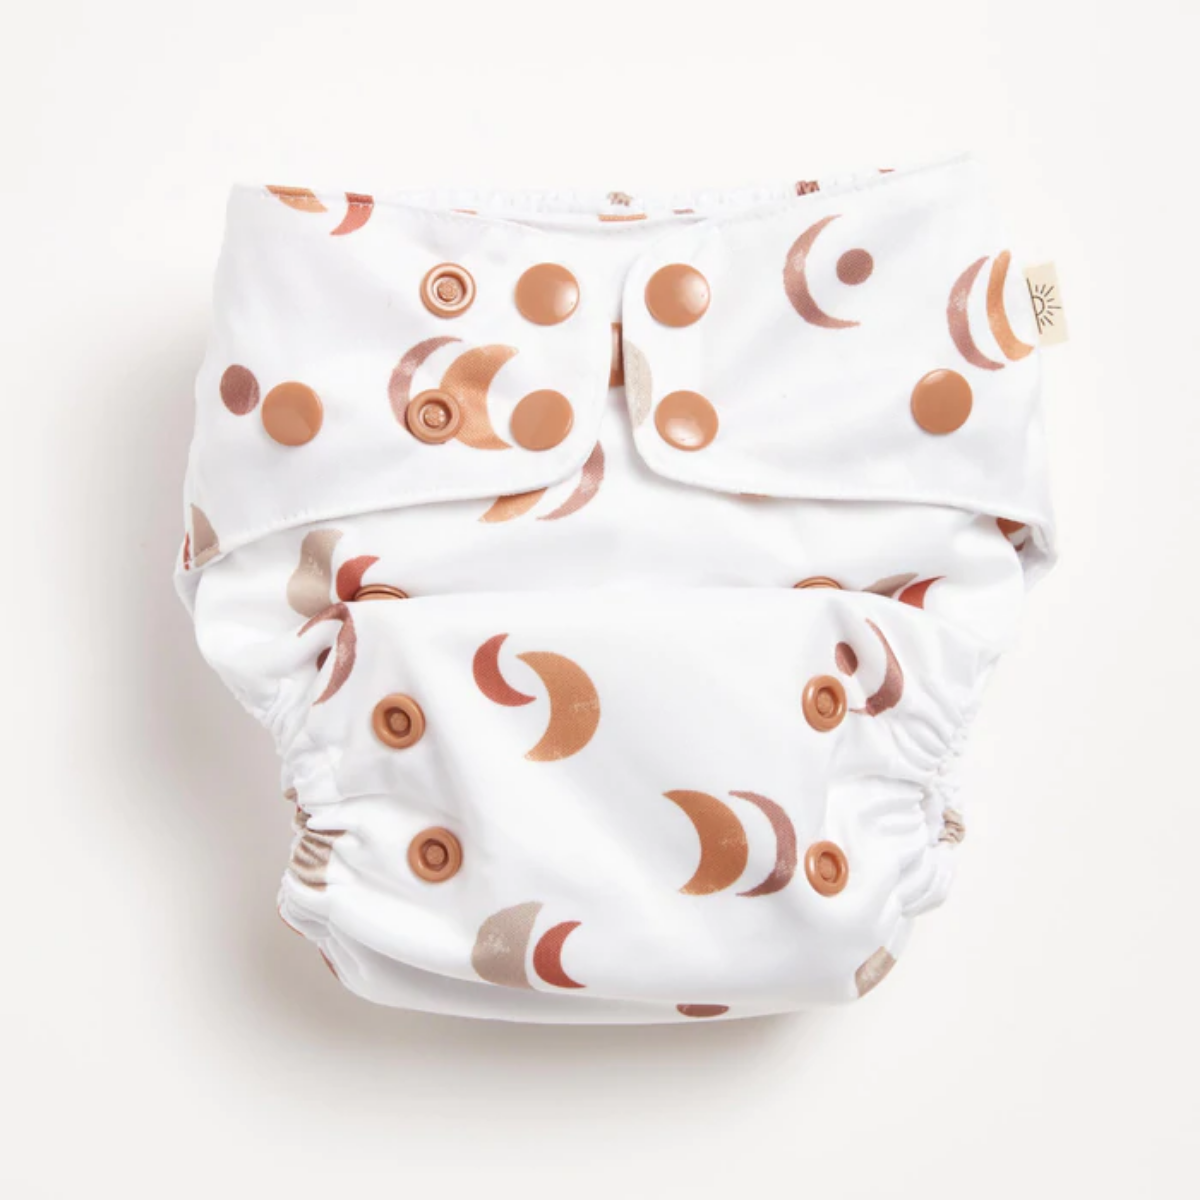 An EcoNaps Desert Moon 2.0 Modern Cloth Nappy on a white surface.